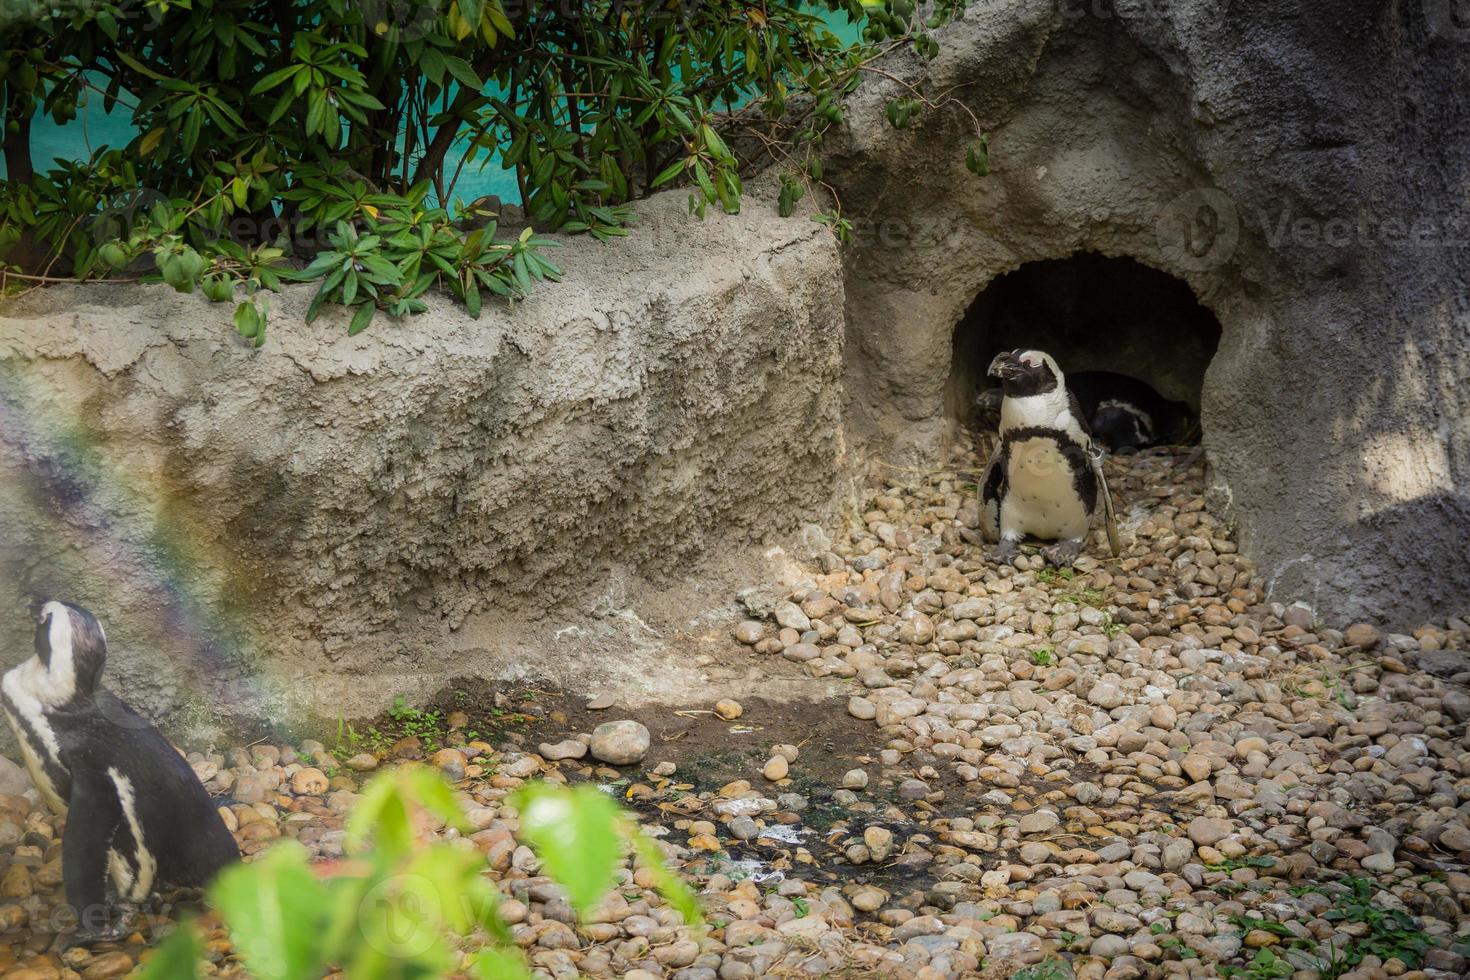 Penguins in cage at the zoo photo